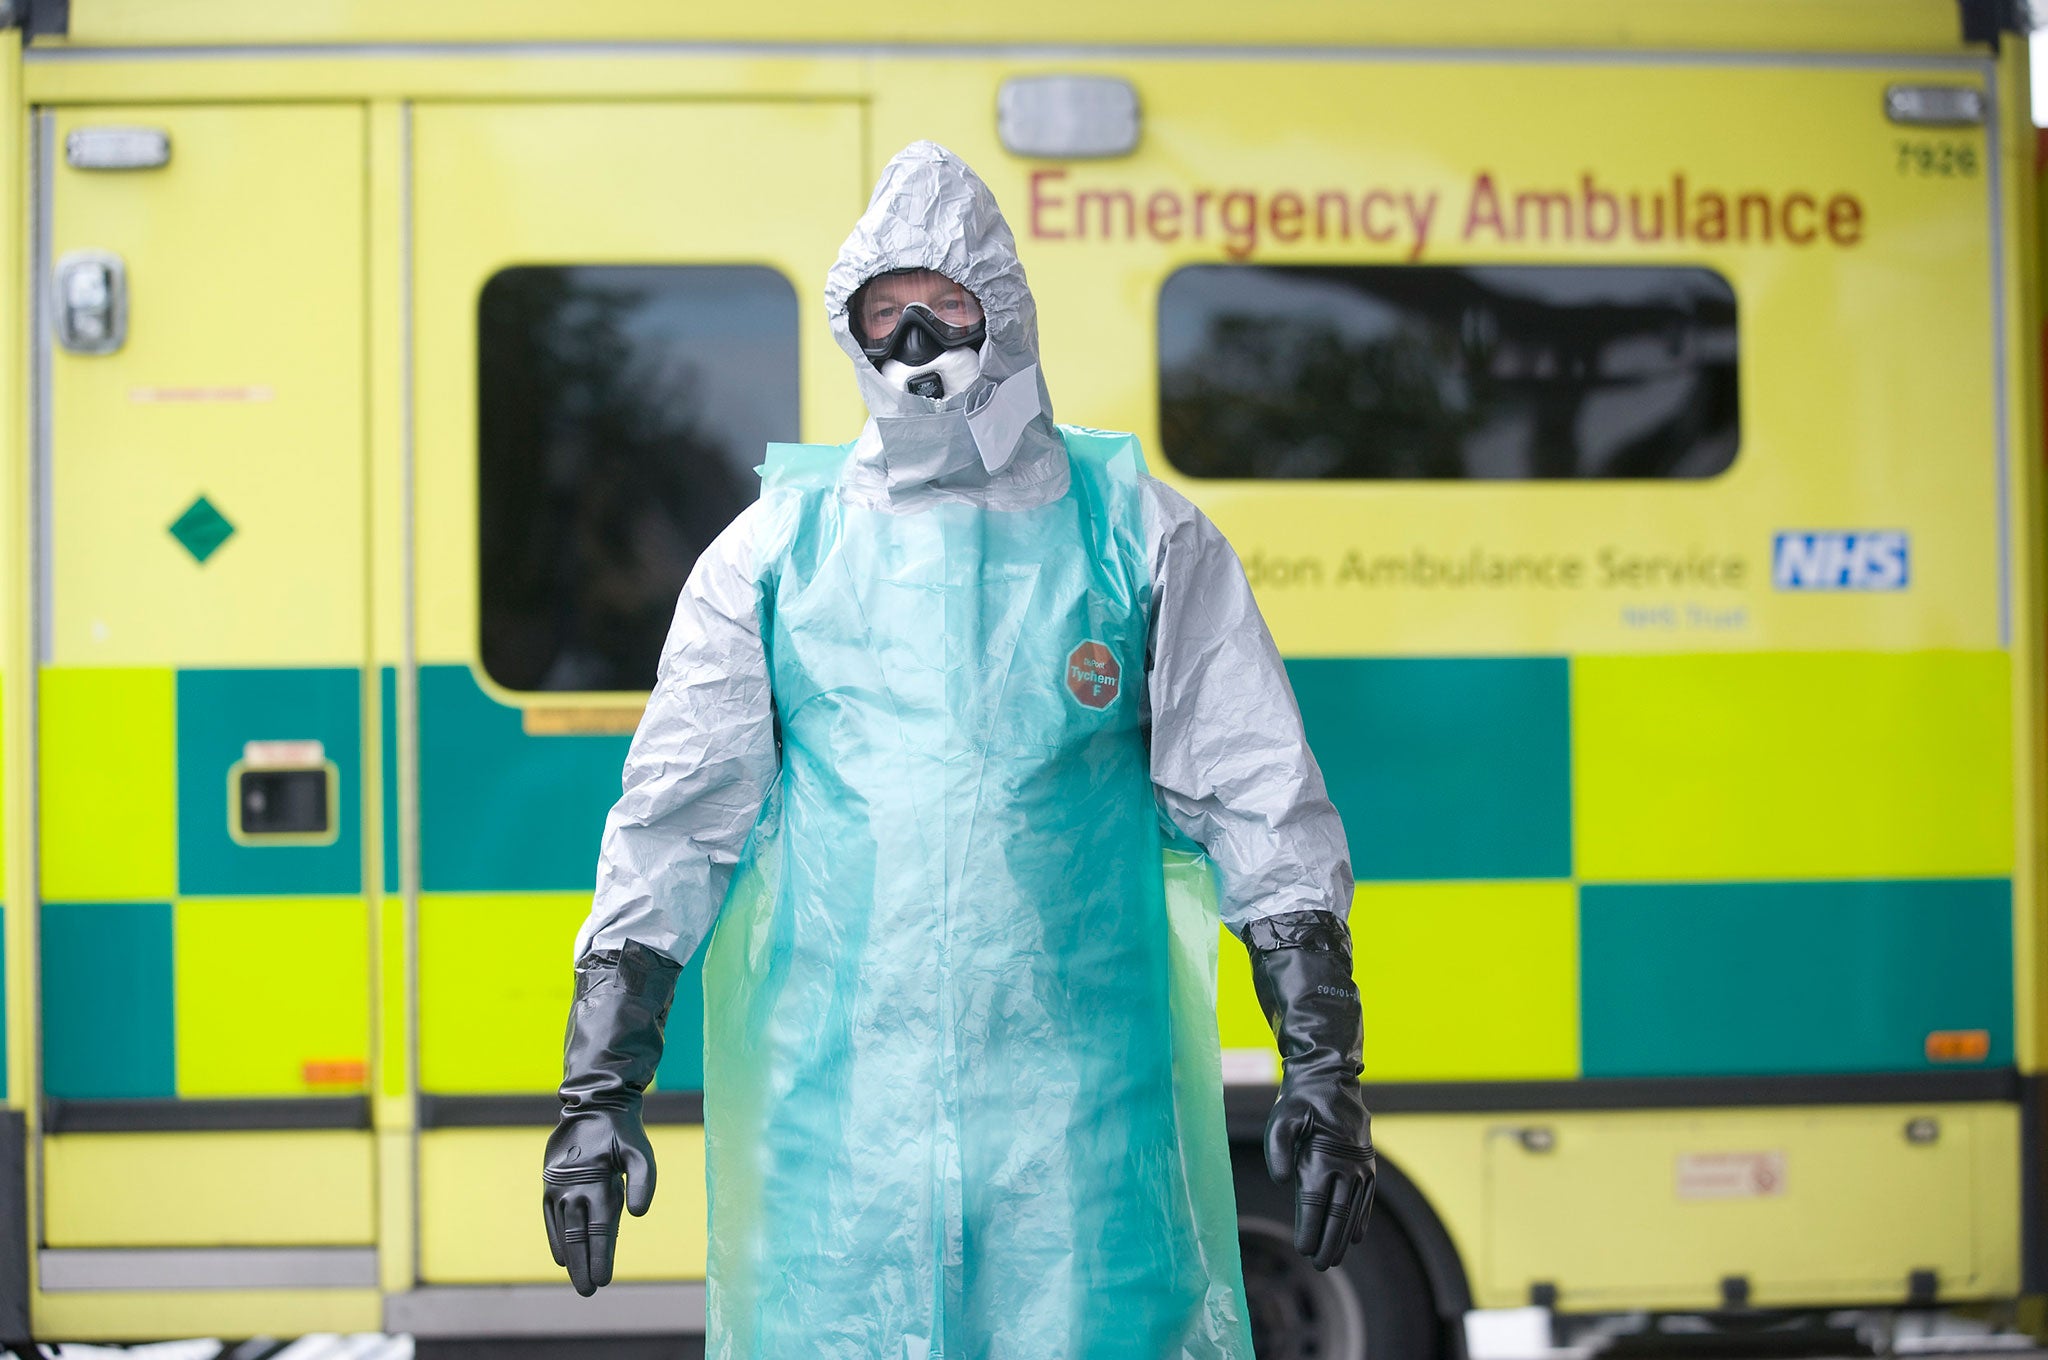 Protective suits would be worn to stop the spread of infection